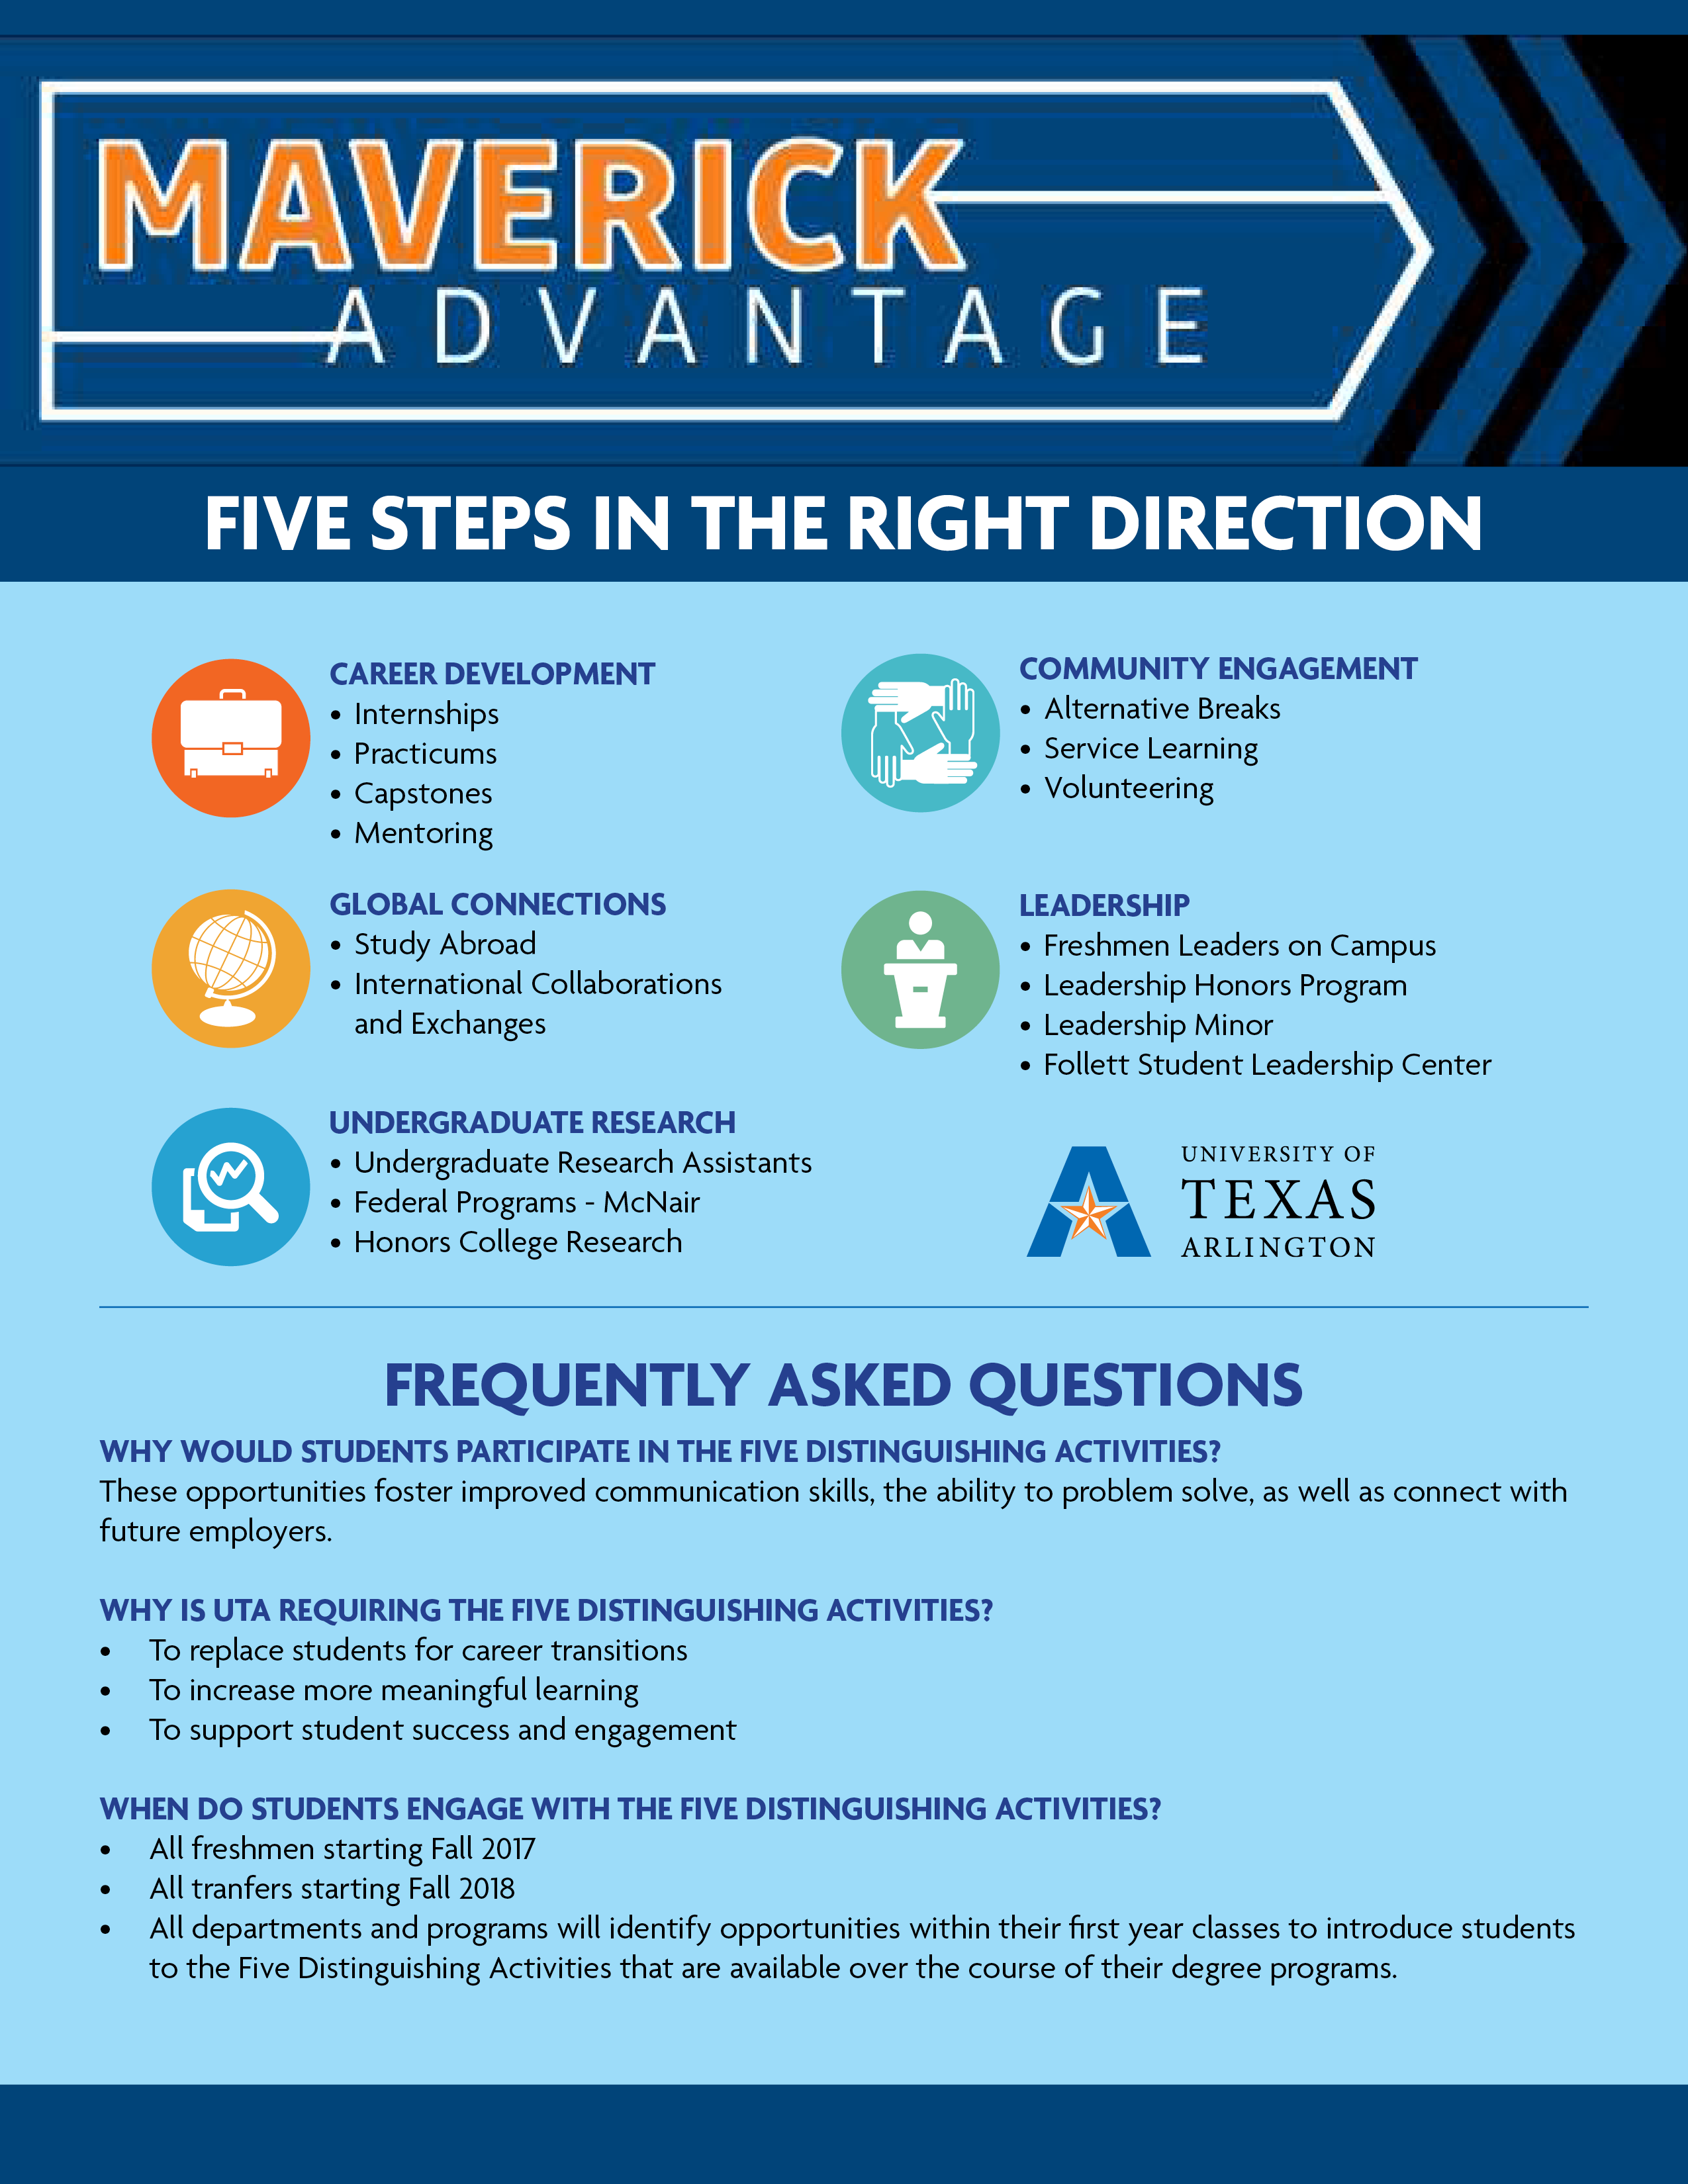 Quality Enhancement Plan Flyer, five steps in the right direction, career development, global connections, undergraduate research, community engagement, leadership